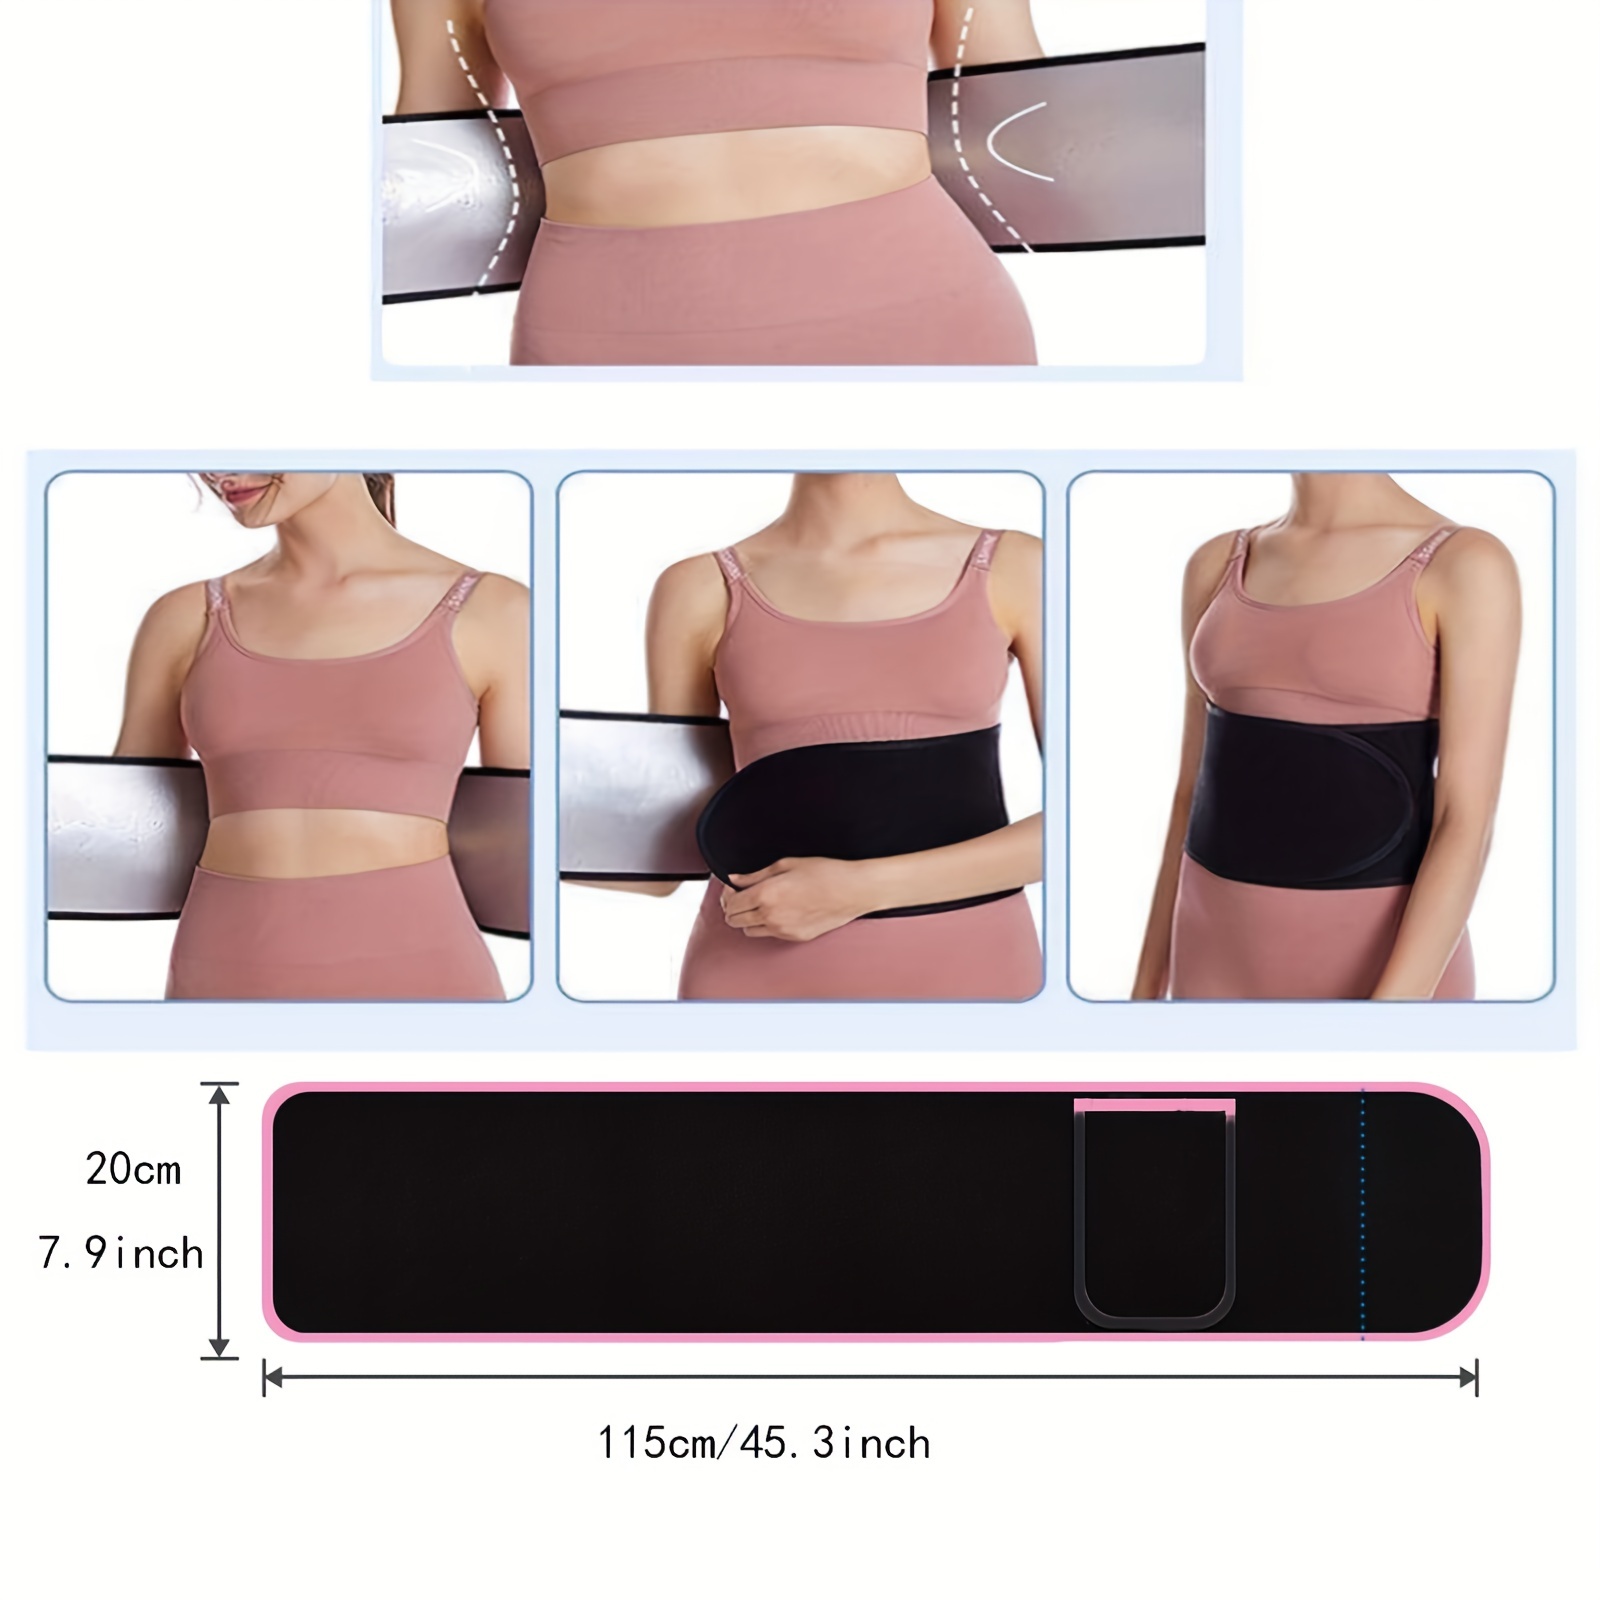 sports waist support belt for men and women lumbar protector for fitness weightlifting basketball training abdominal belt for core stability